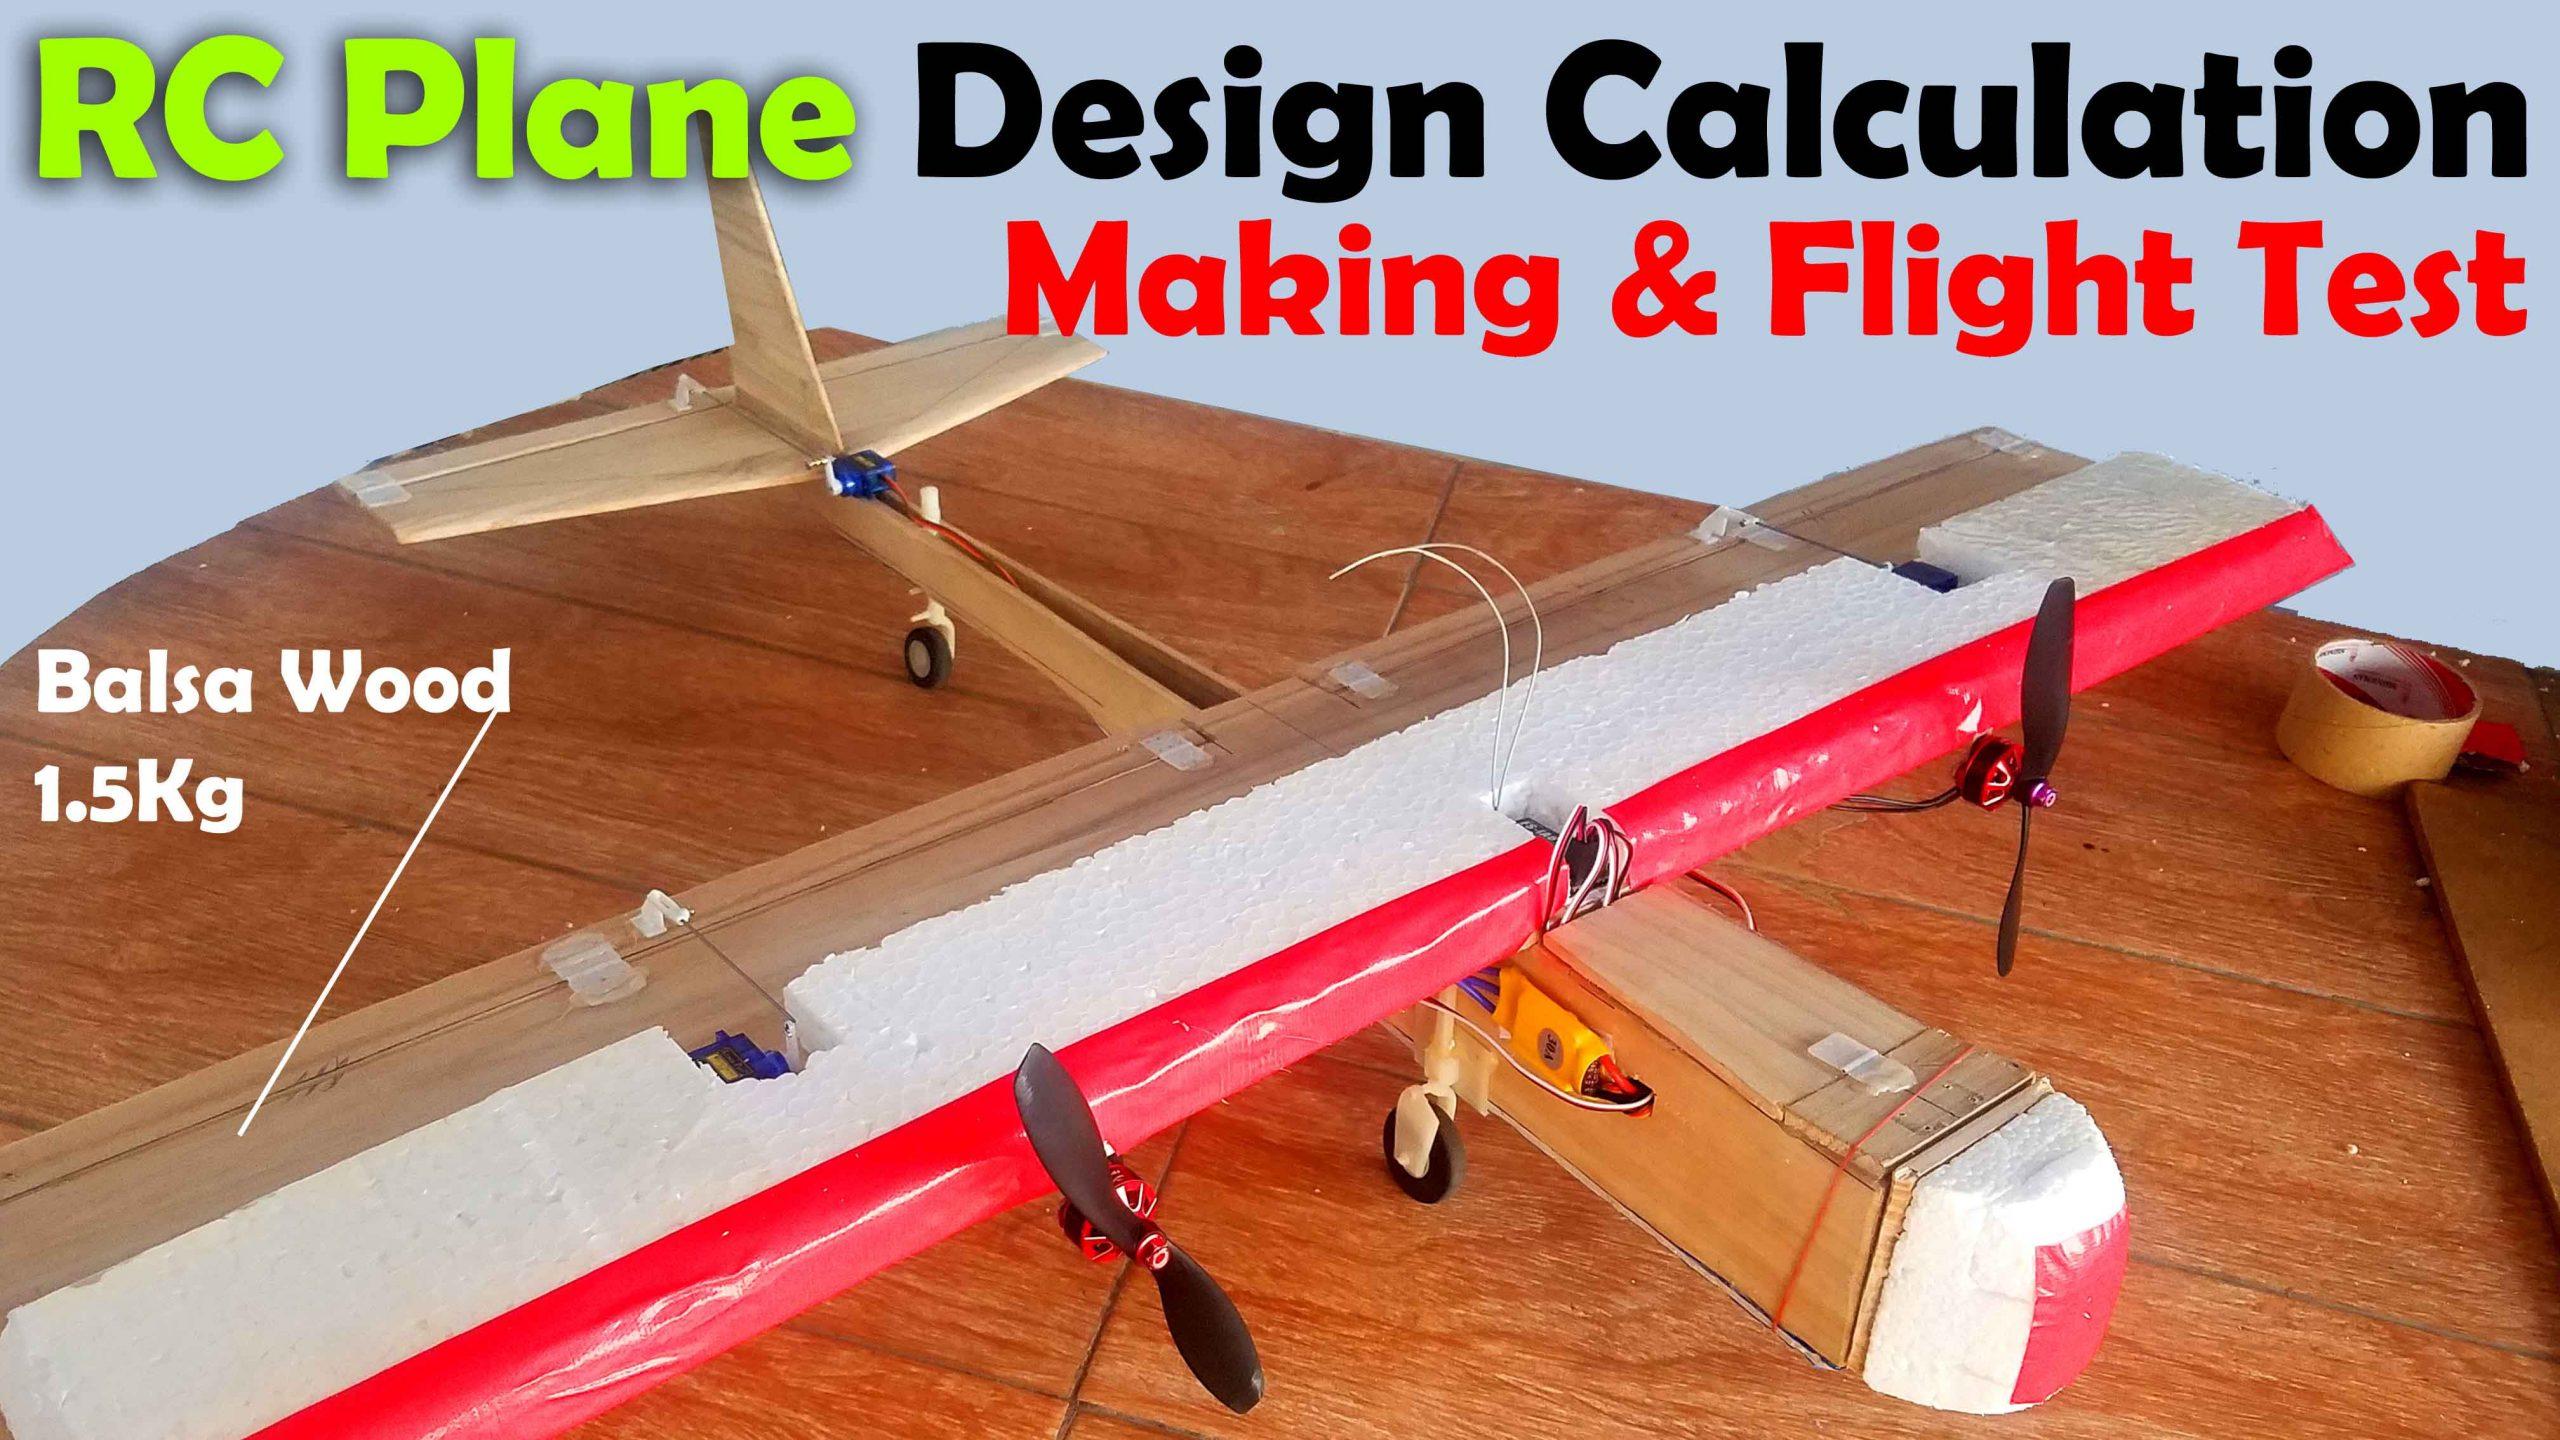 Wood Rc Plane Kits: Tips for flying your wood RC plane